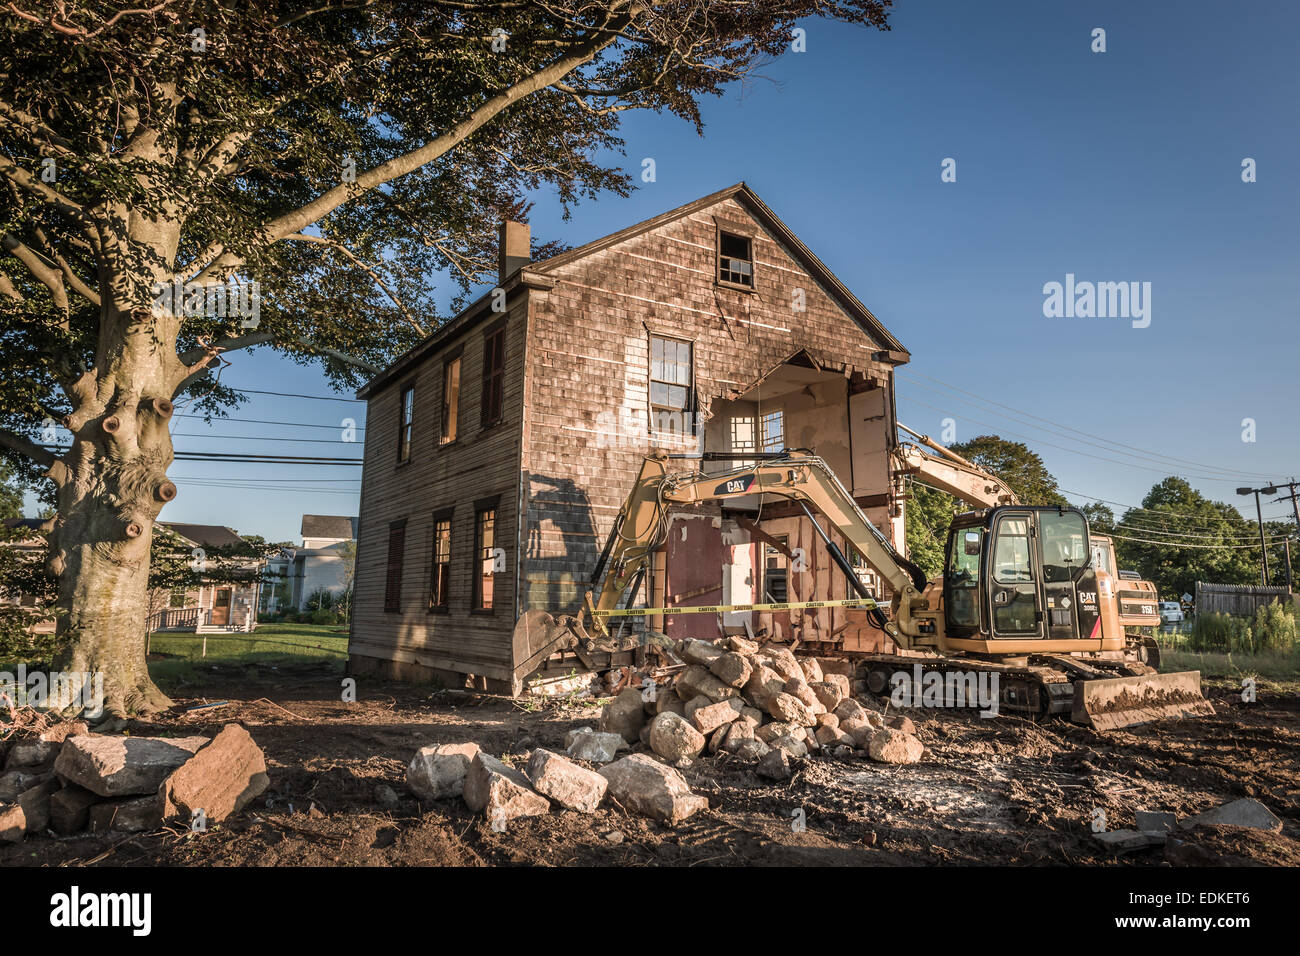 A three hundred year old house awaits the final act in its demolition - Falmouth, Massachusetts, USA. Stock Photo